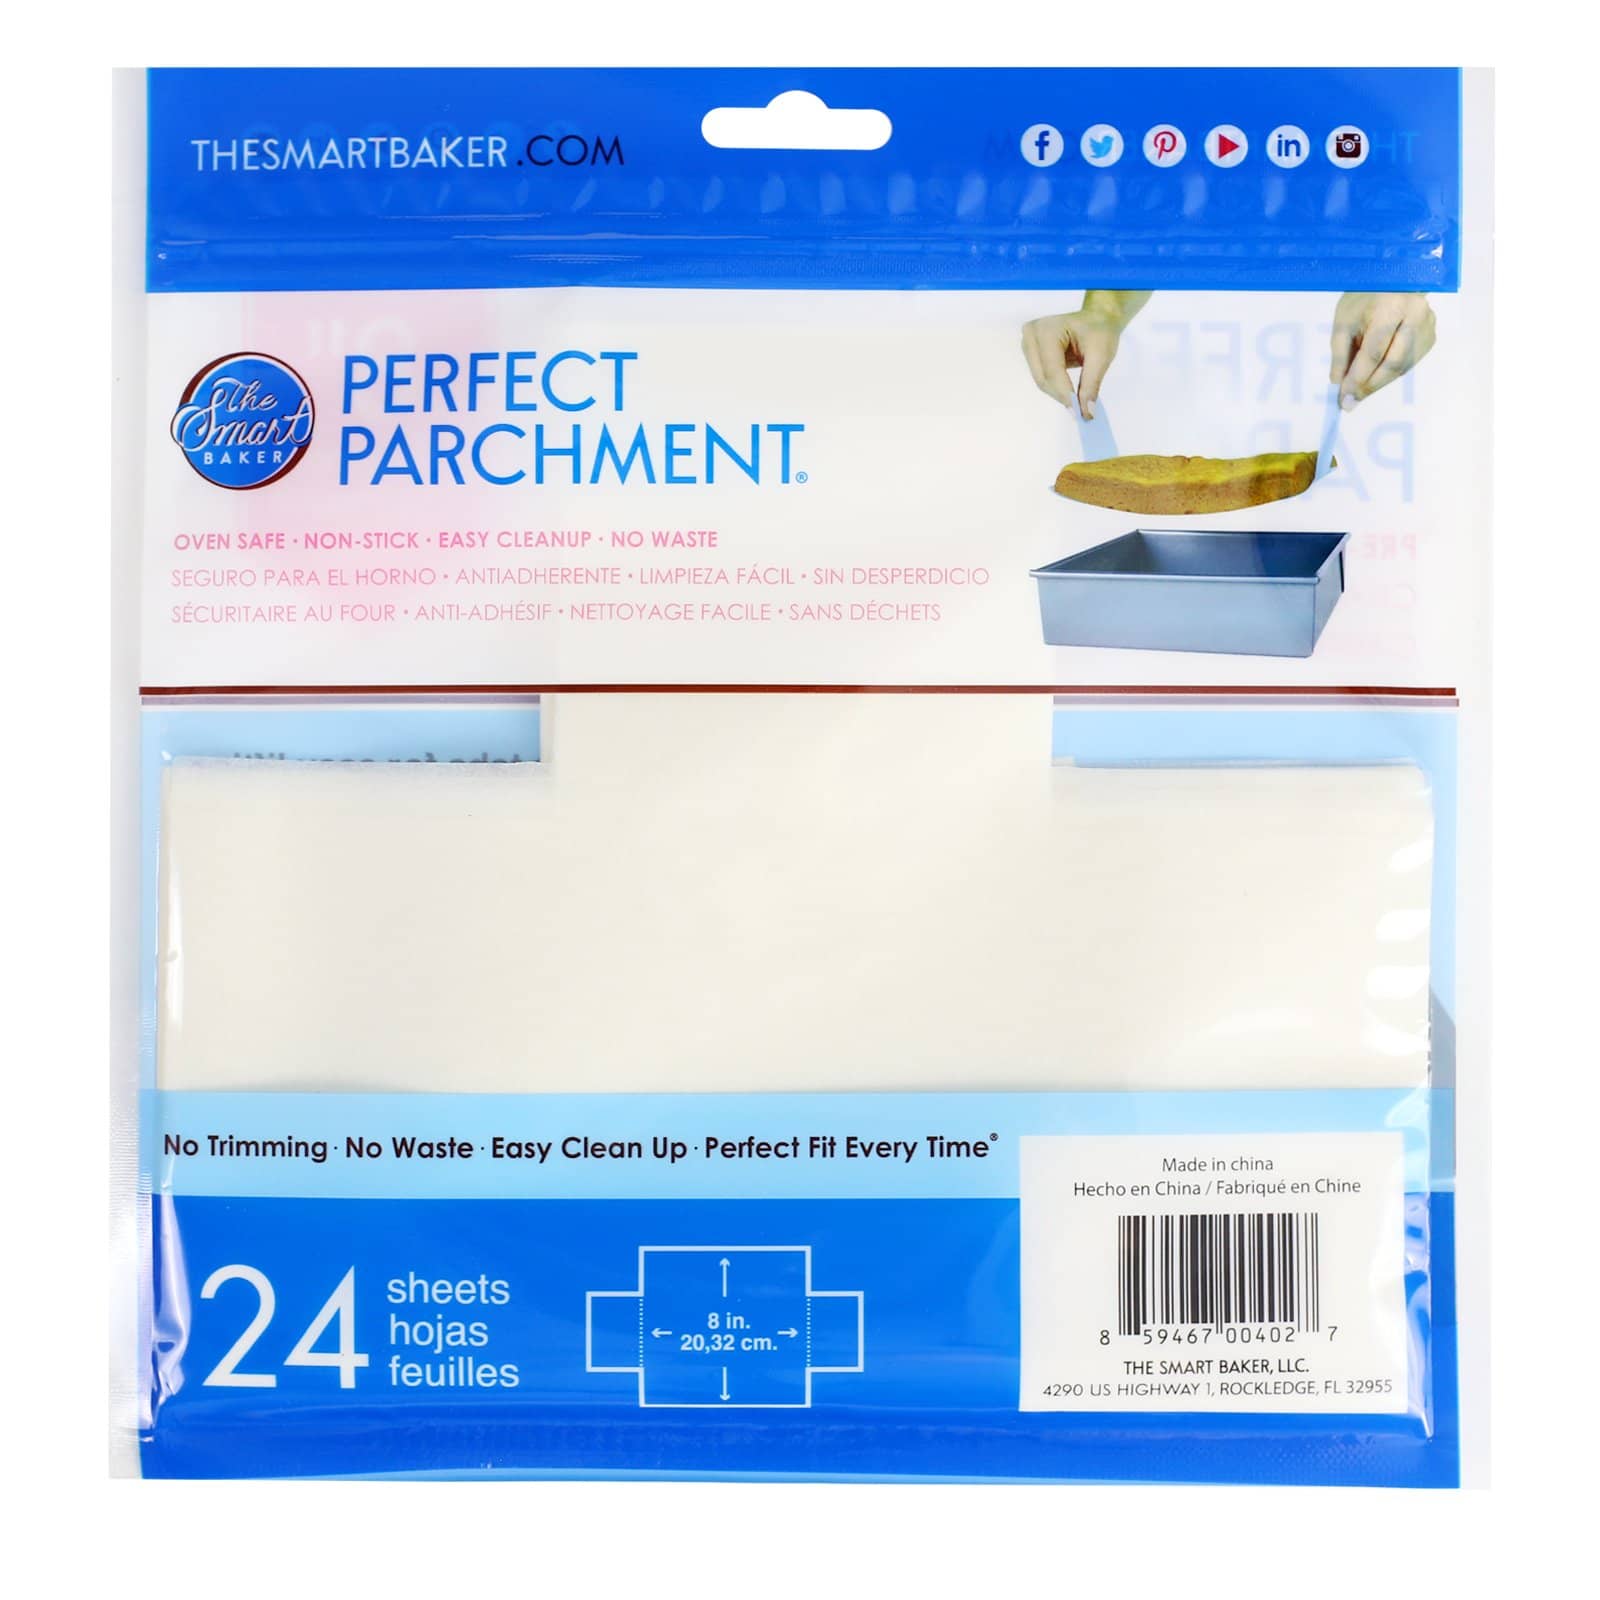 Zenlogy 8x8 Parchment Squares (200 sheets) - Unbleached, Non-stick, Pre-cut  Parchment Paper - Fits 8x8 Brownie Square Pans and Toaster Oven Trays, and